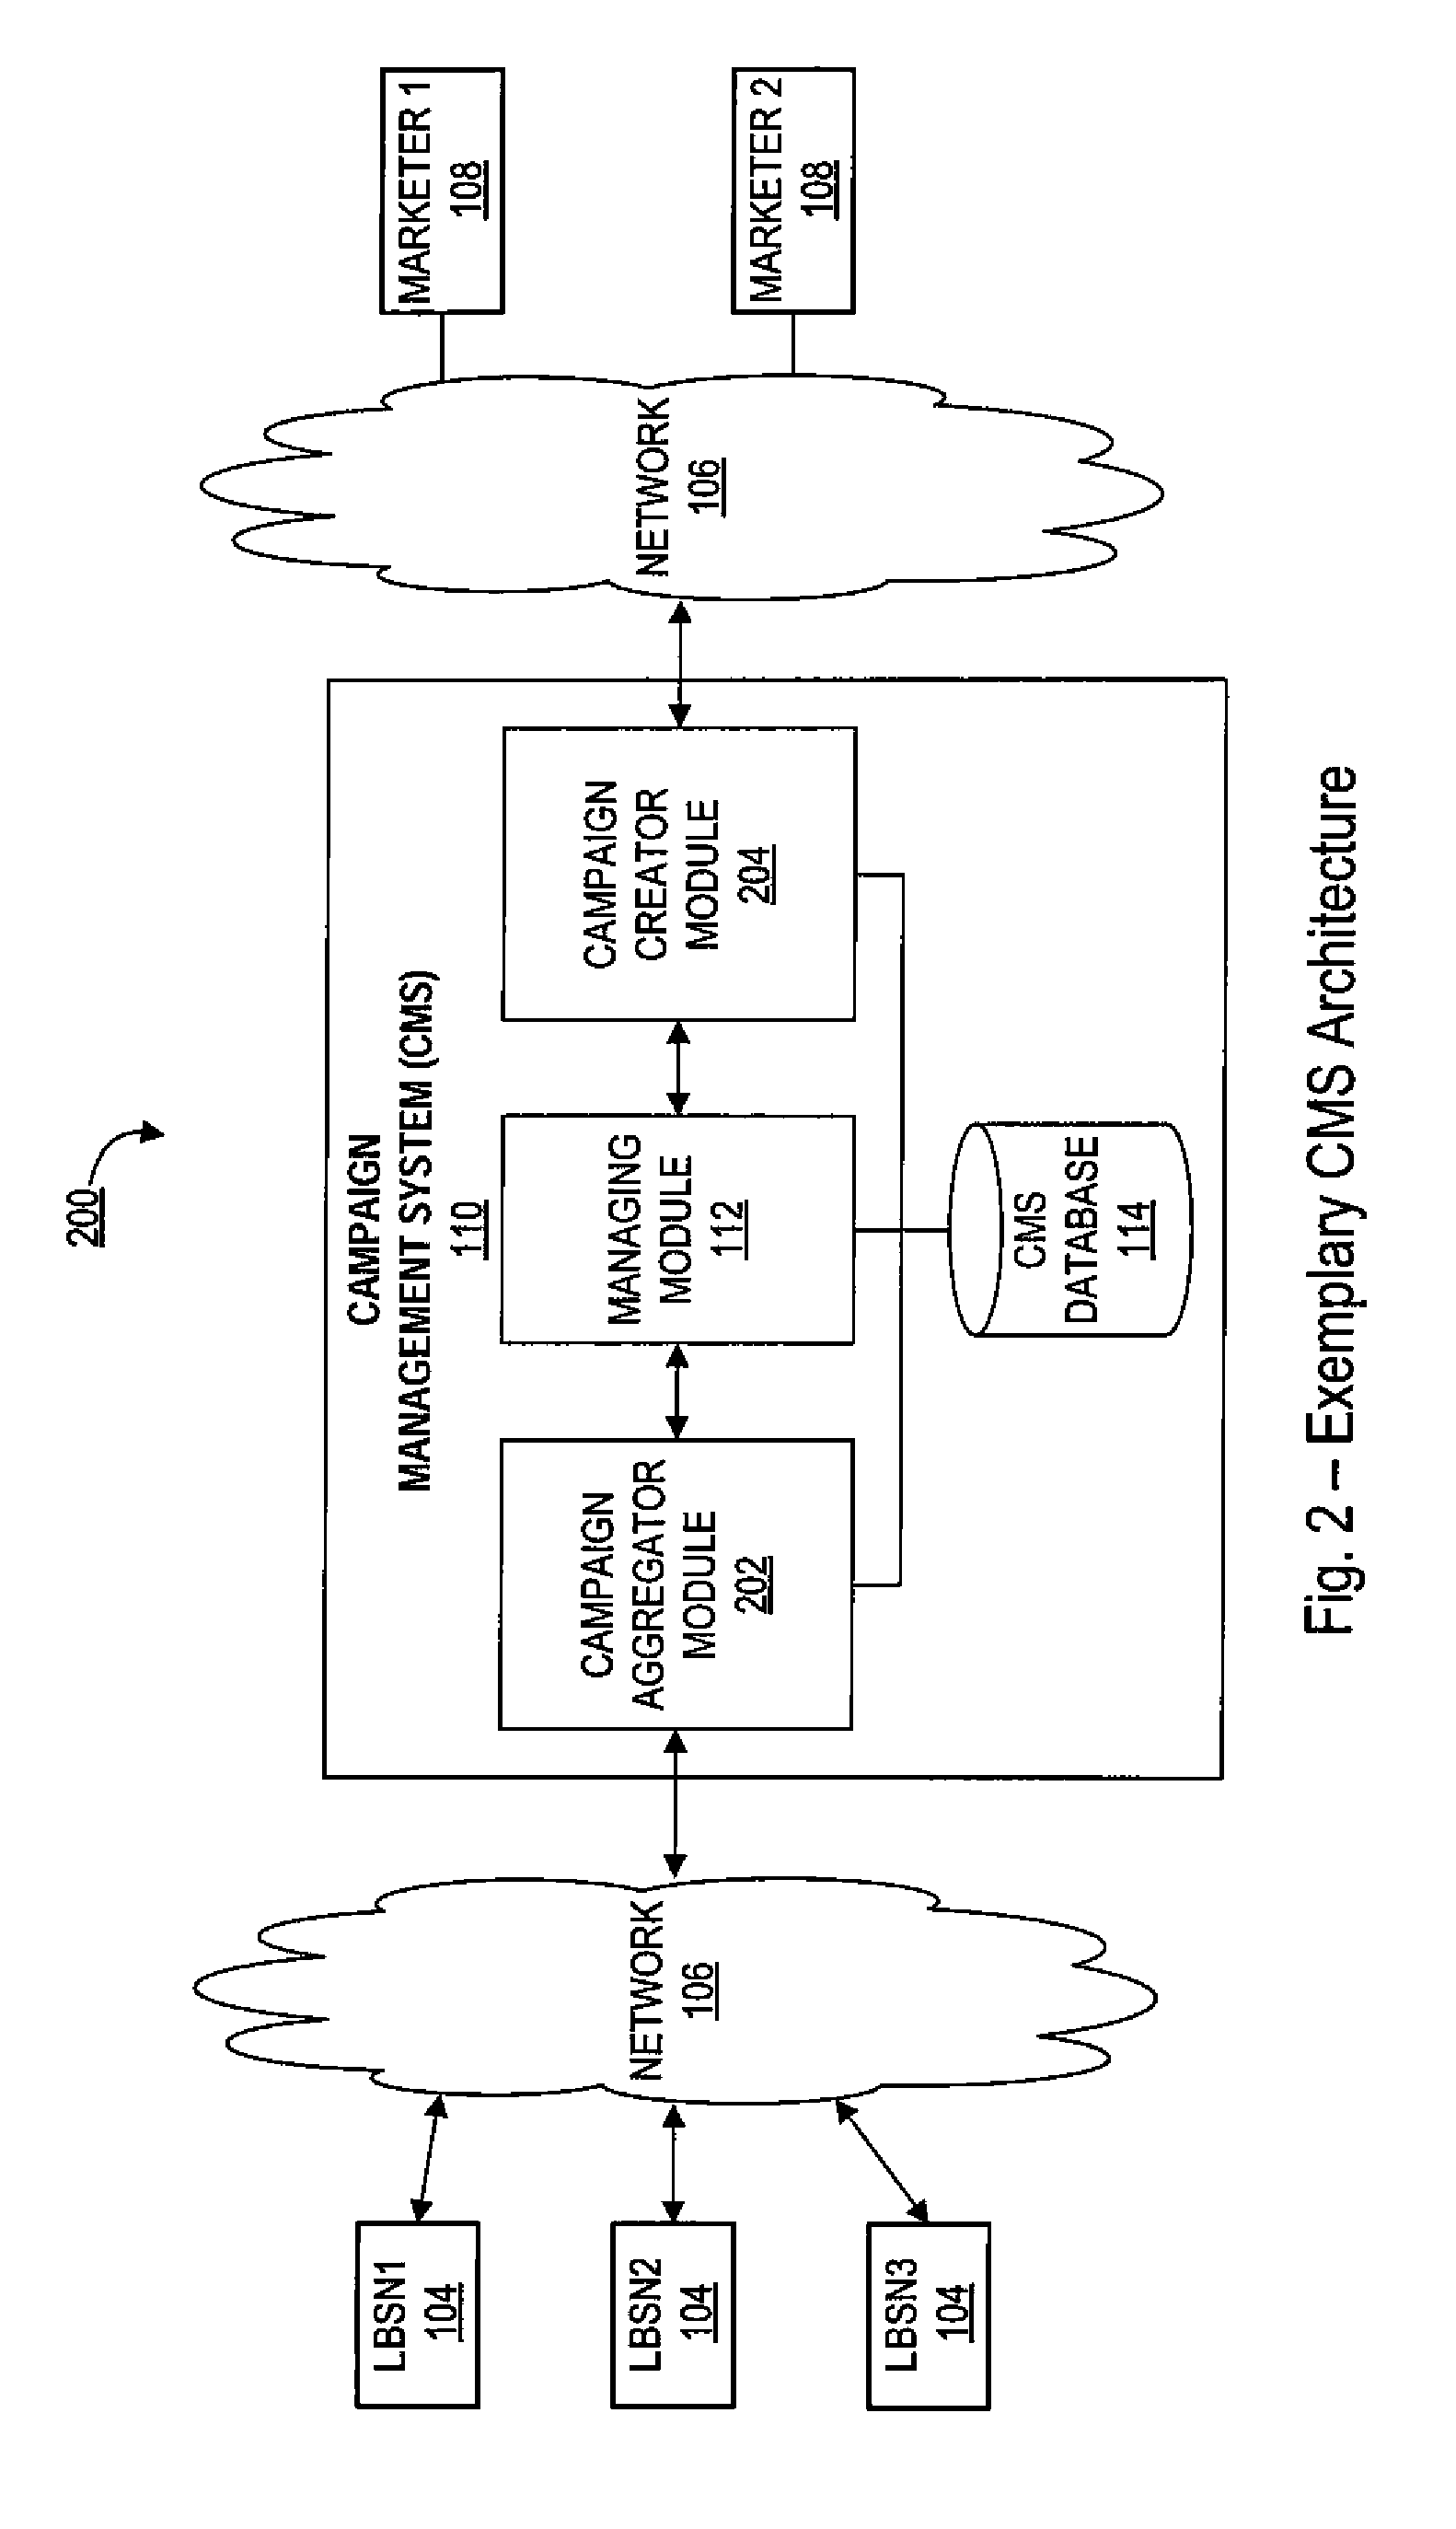 Systems and methods for delivering targeted content to a consumer's mobile device based on the consumer's physical location and social media memberships